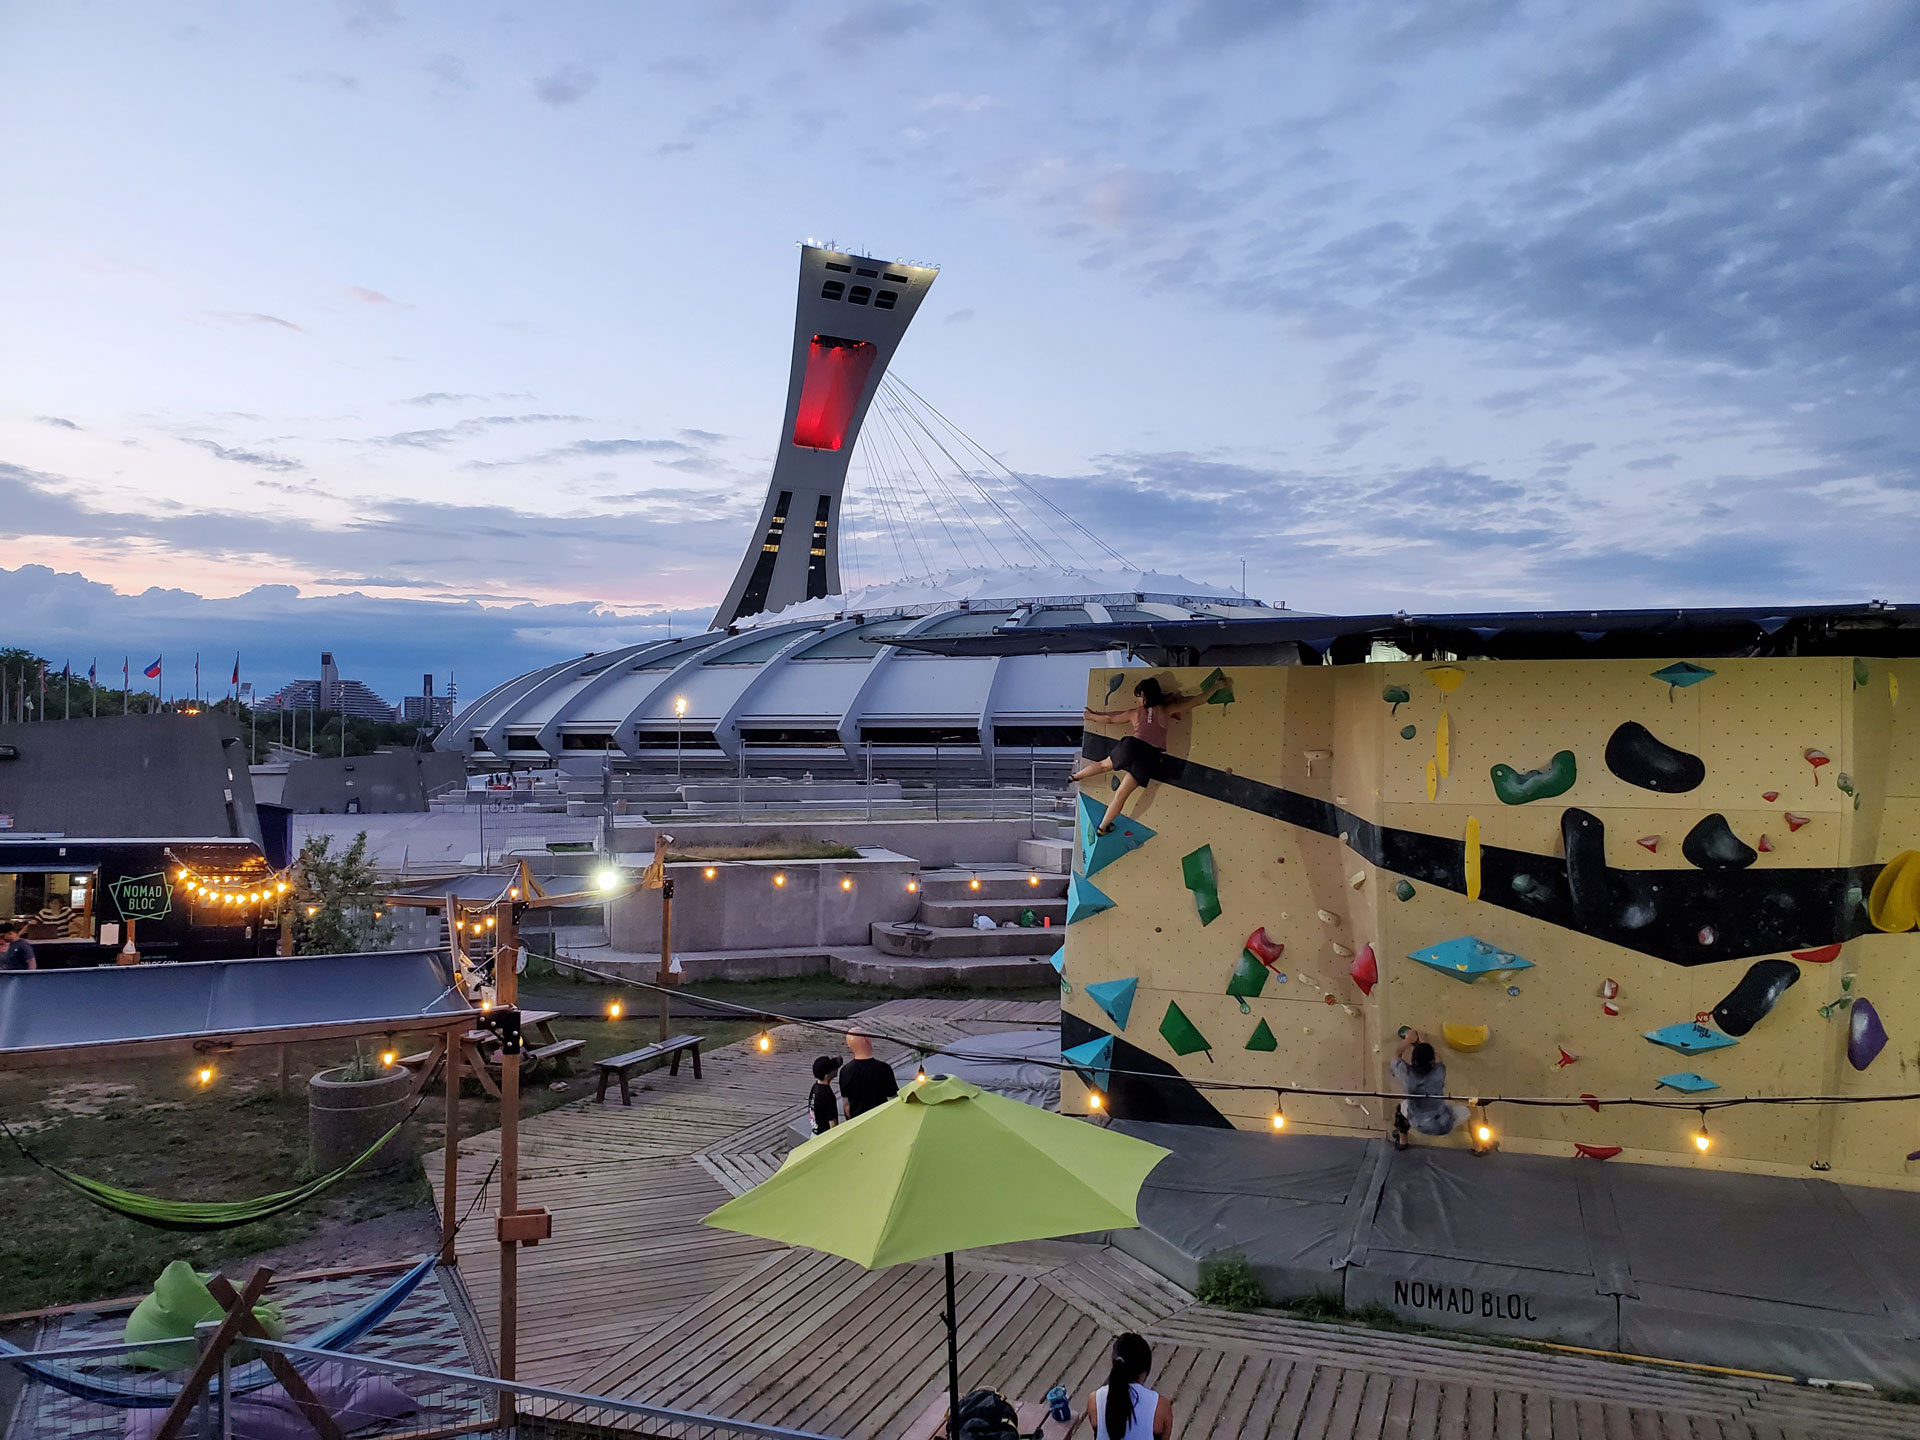 Nomad bouldering wall at Montreal's Olympic Stadium